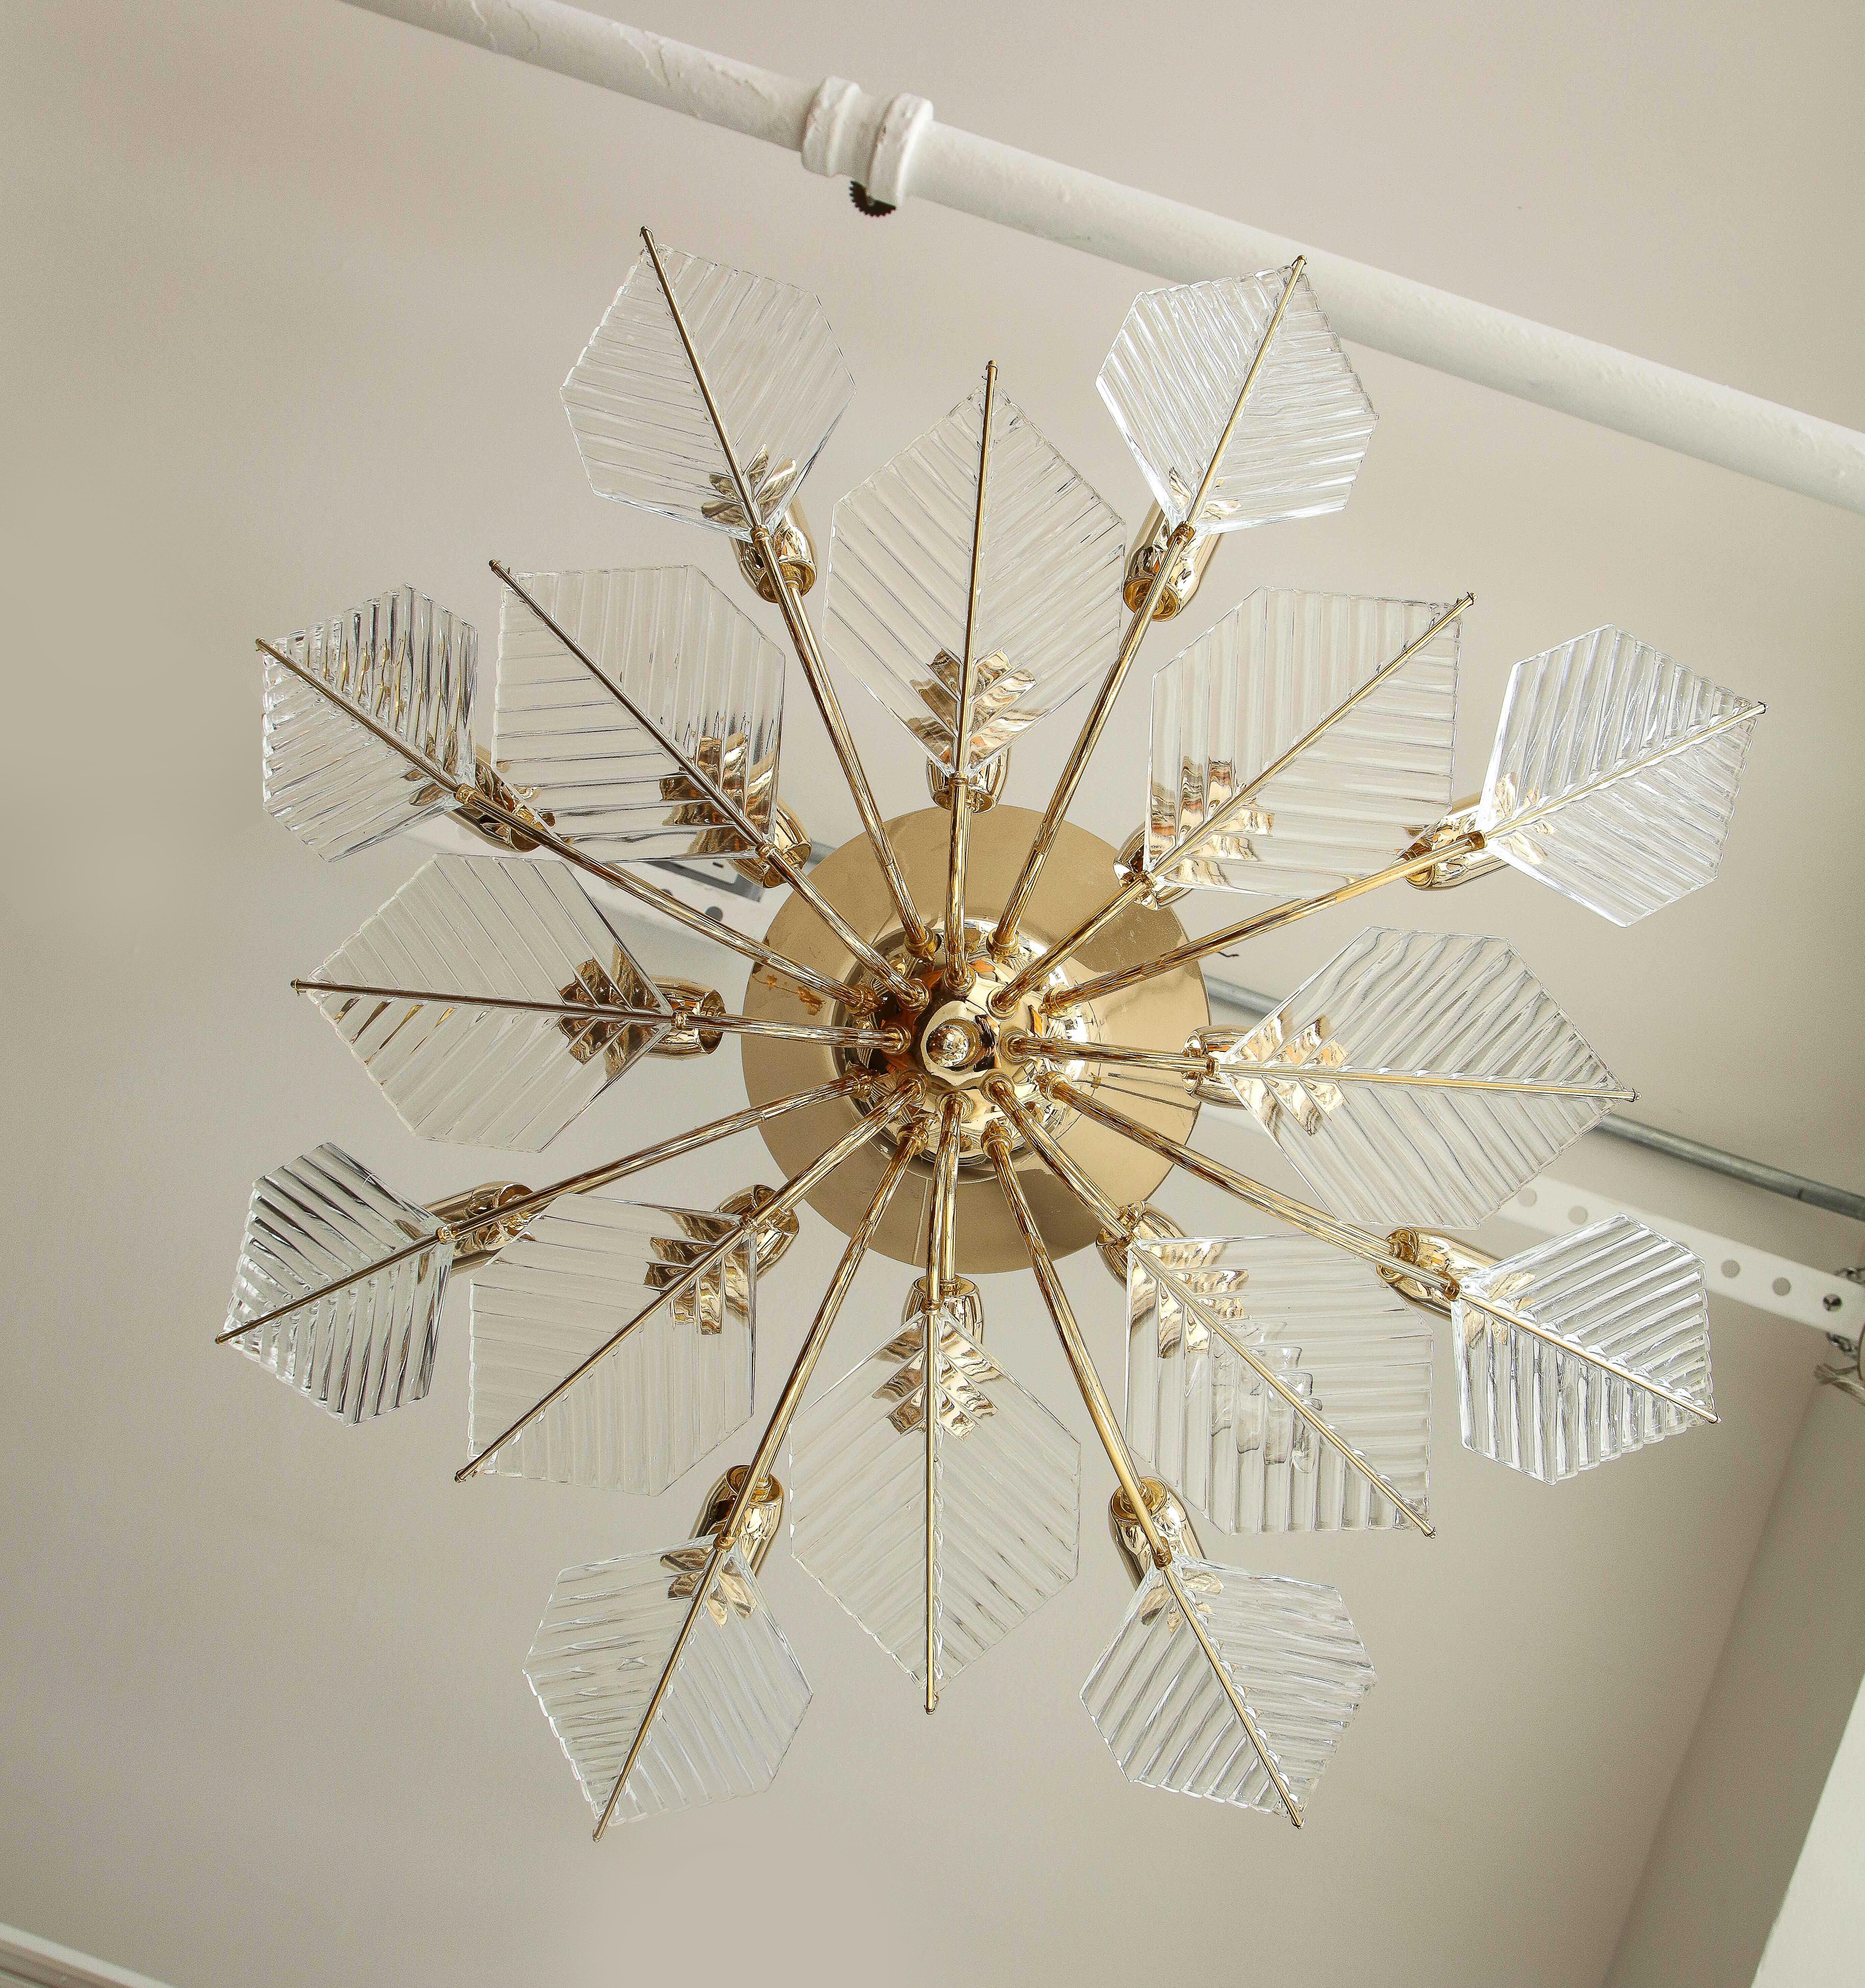 Italian 15 Light Glass Chandelier Decorated with Leaf Motif, La Murrina, 1970's For Sale 6